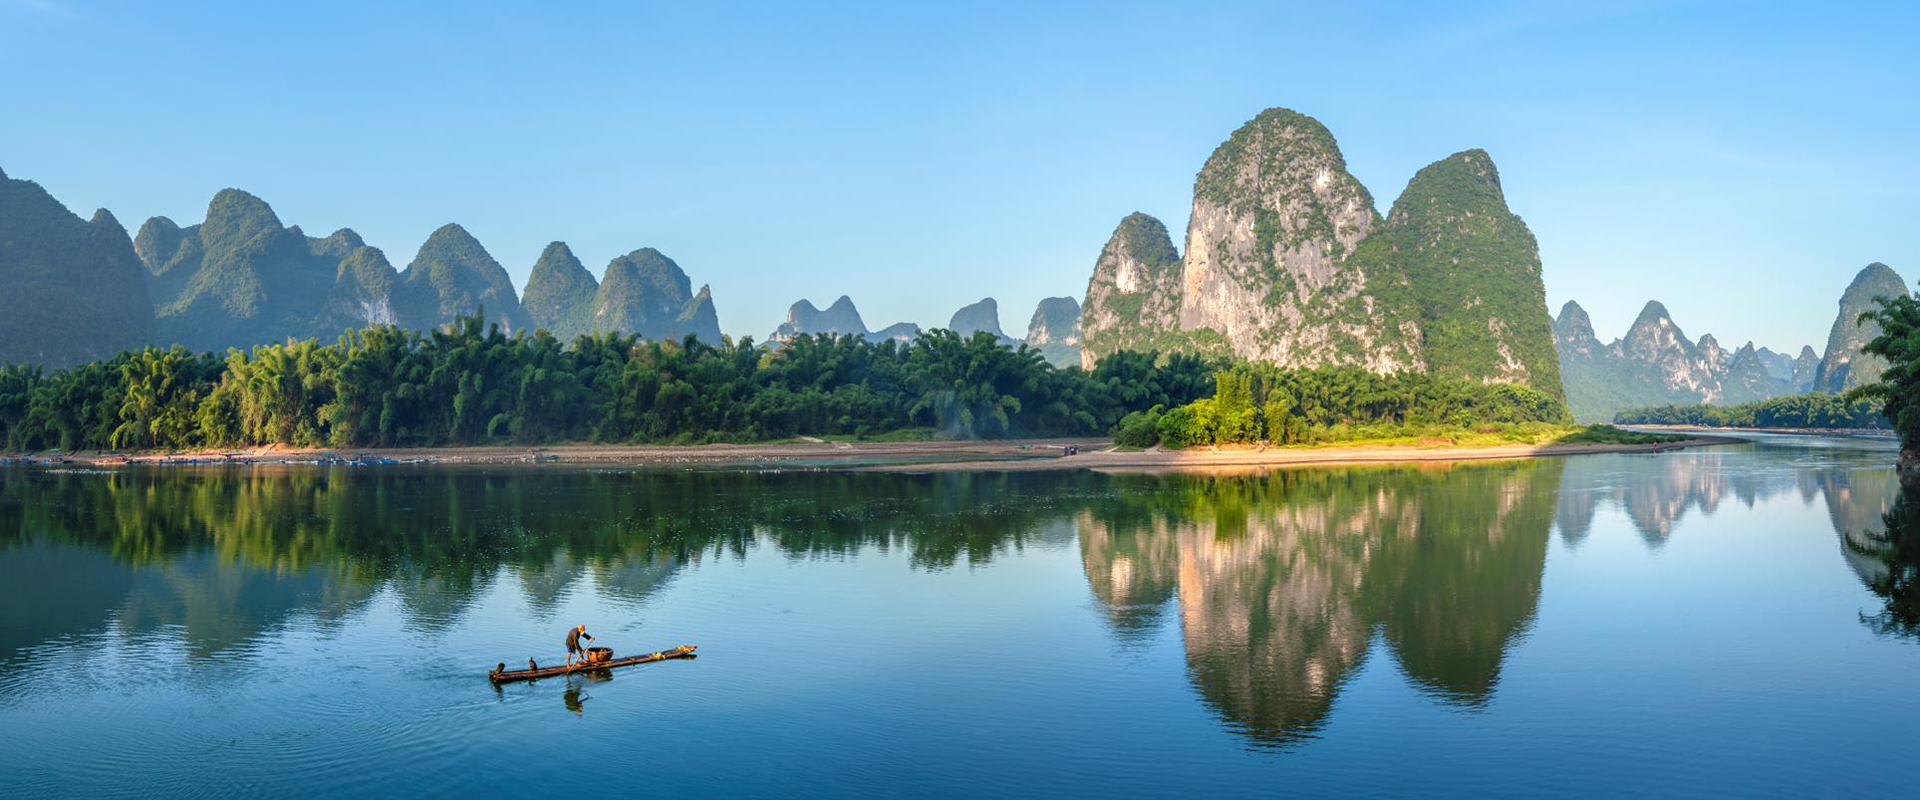 Looking forward to your visit in Guilin